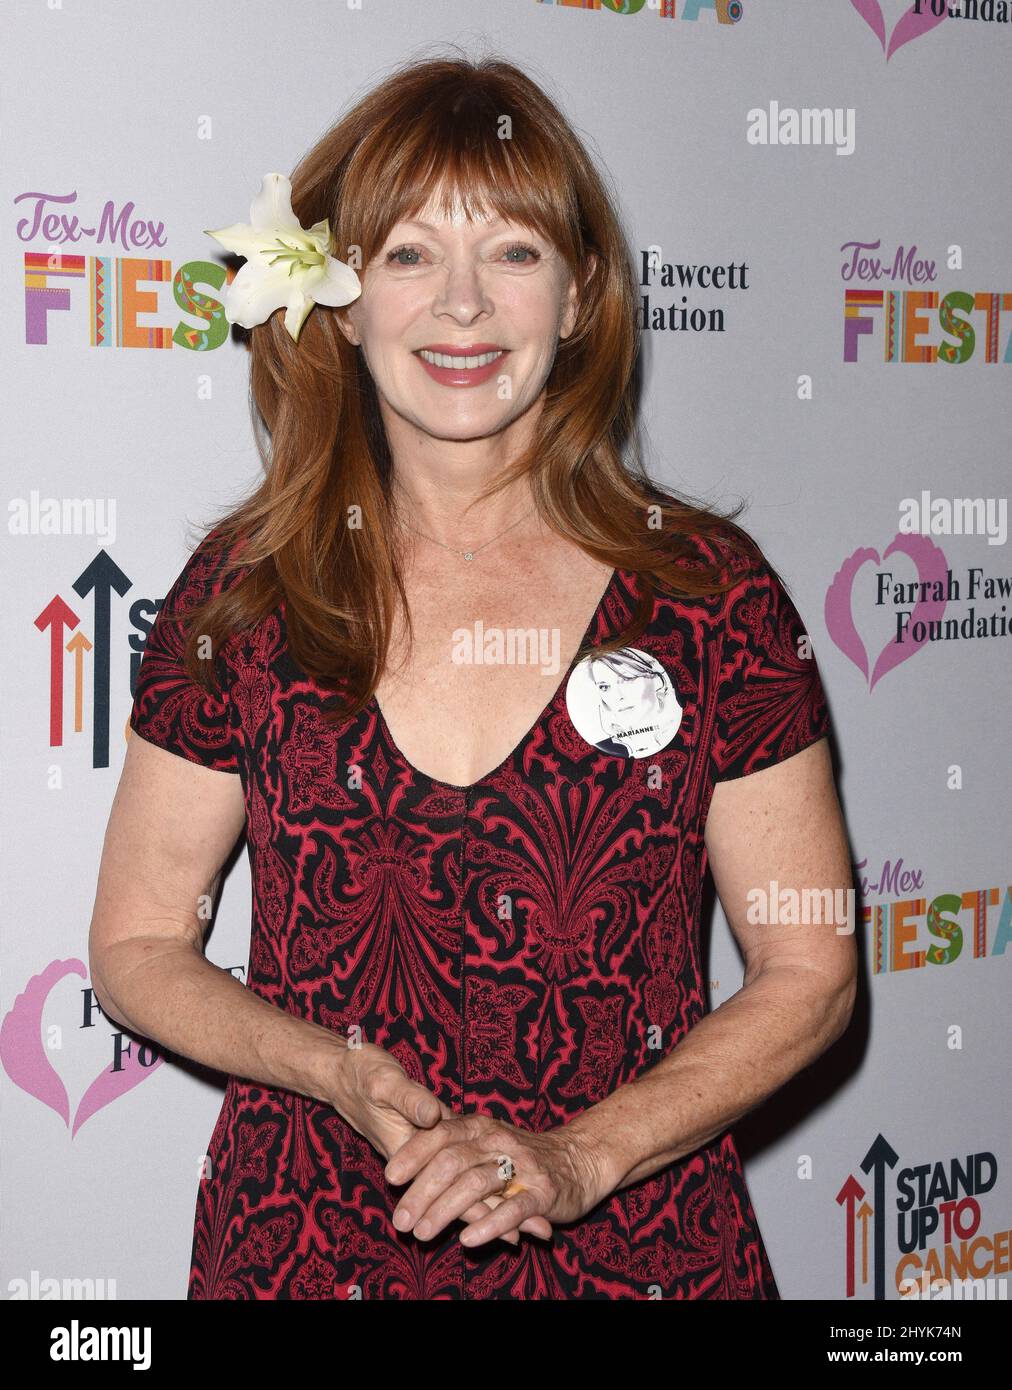 Frances Fisher at The Farrah Fawcett Foundation's Tex-Mex Fiesta held at the Wallis Annenberg Center for the Performing Arts on September 6, 2019 in Beverly Hills, USA. Stock Photo